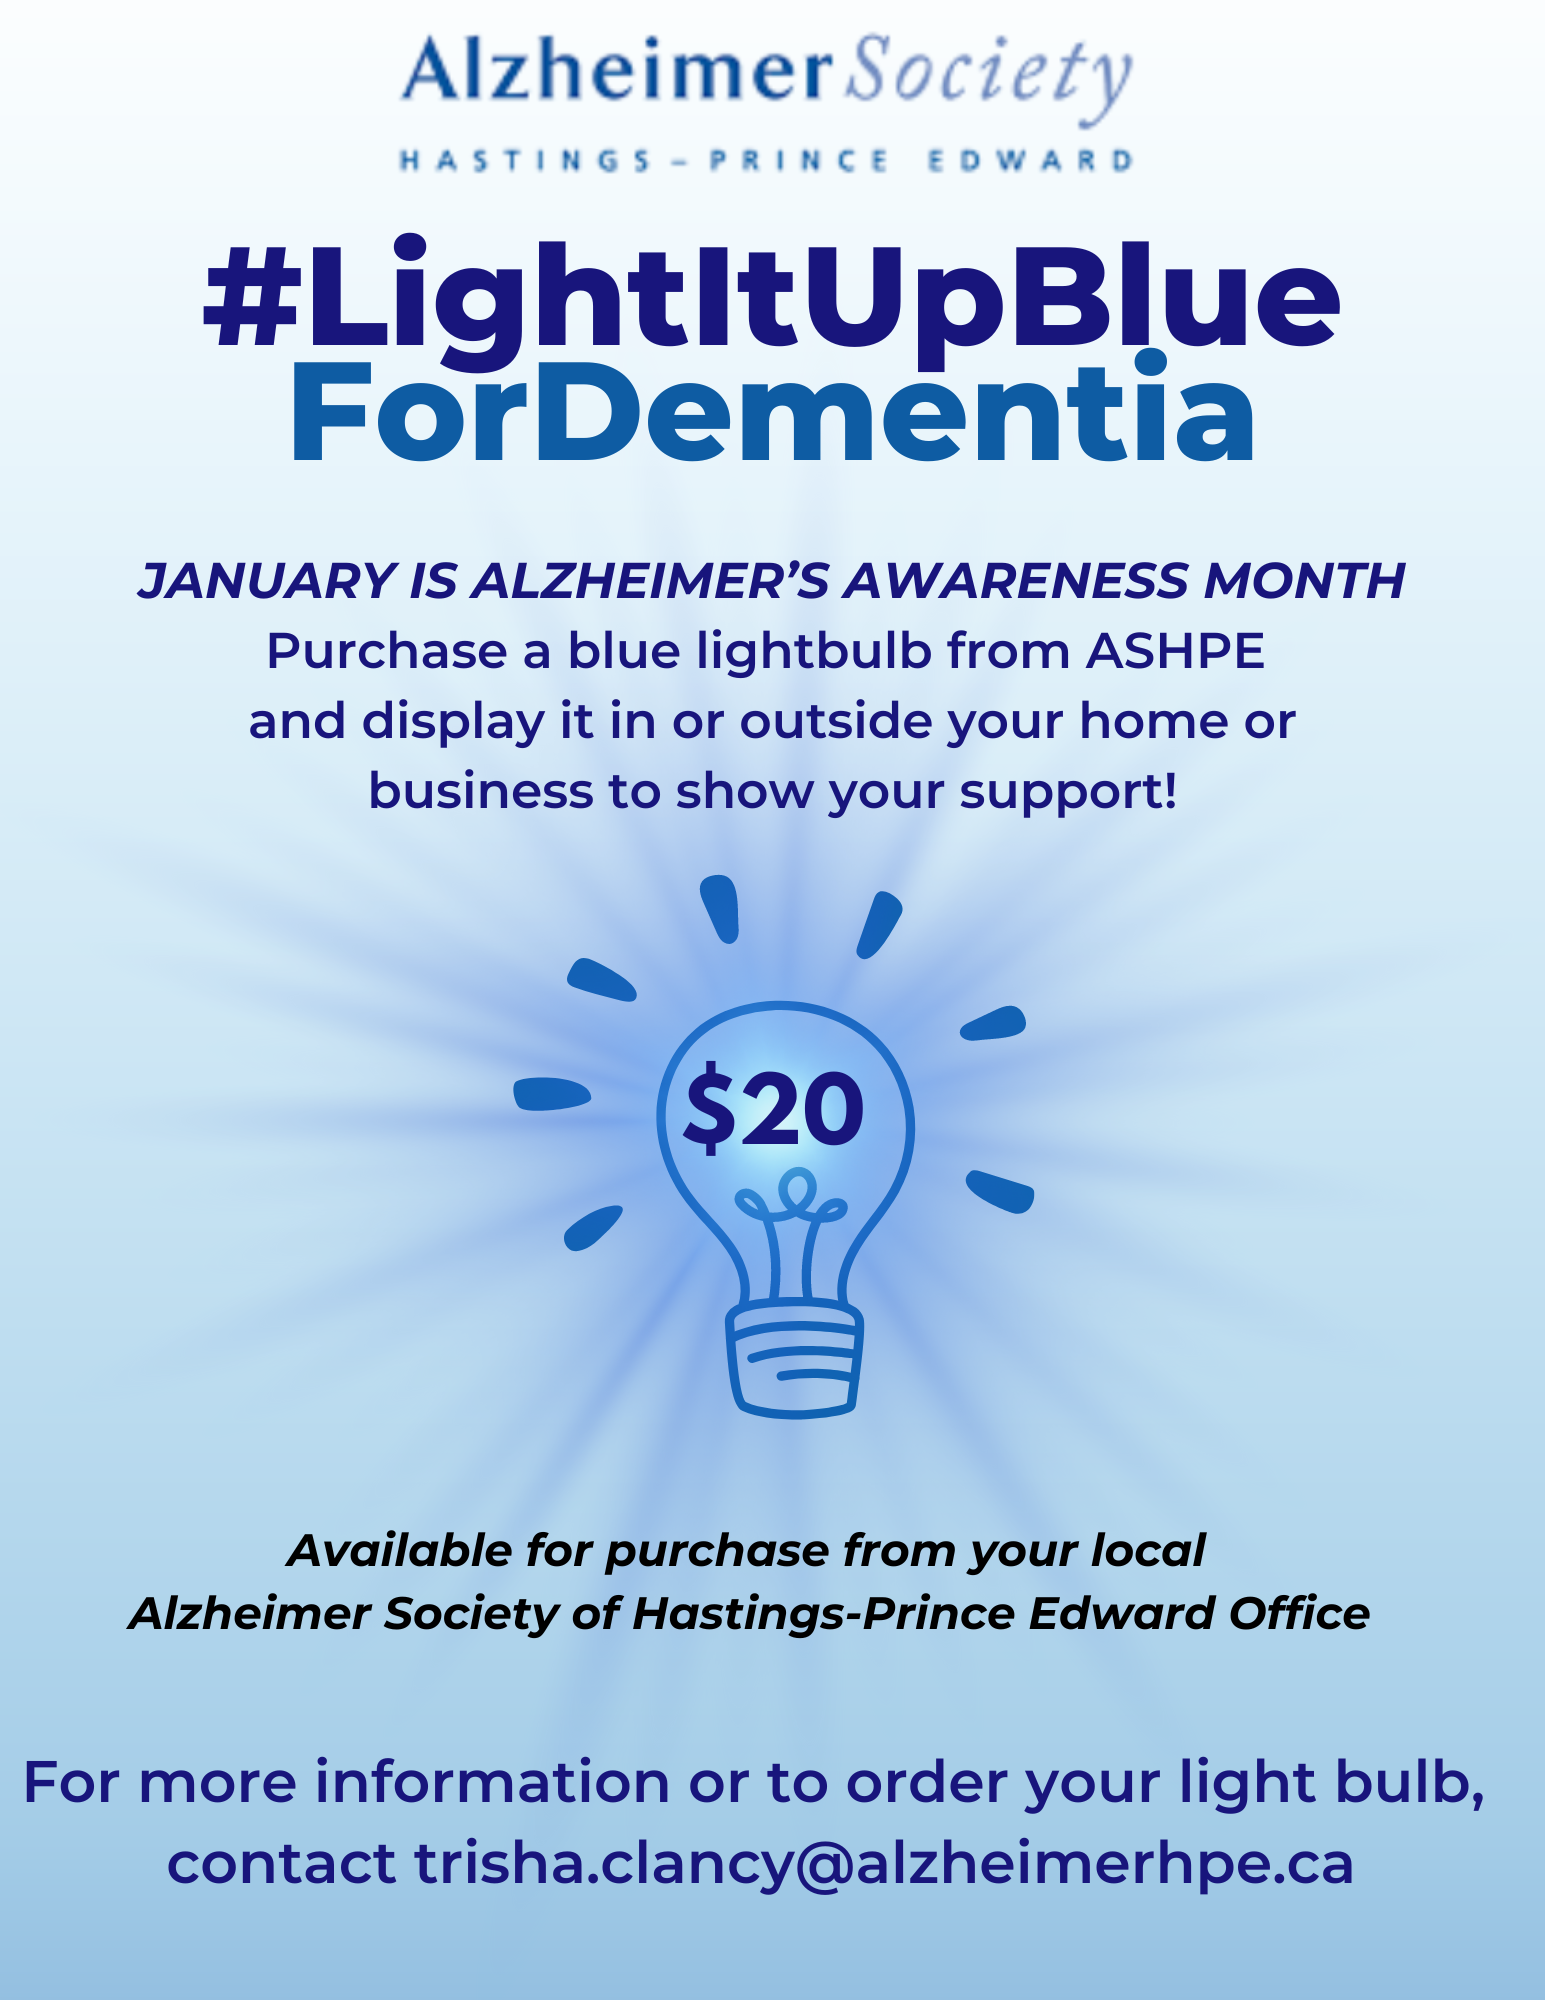 light it up blue for dementia with a blue light bulb from the Alzheimer Society